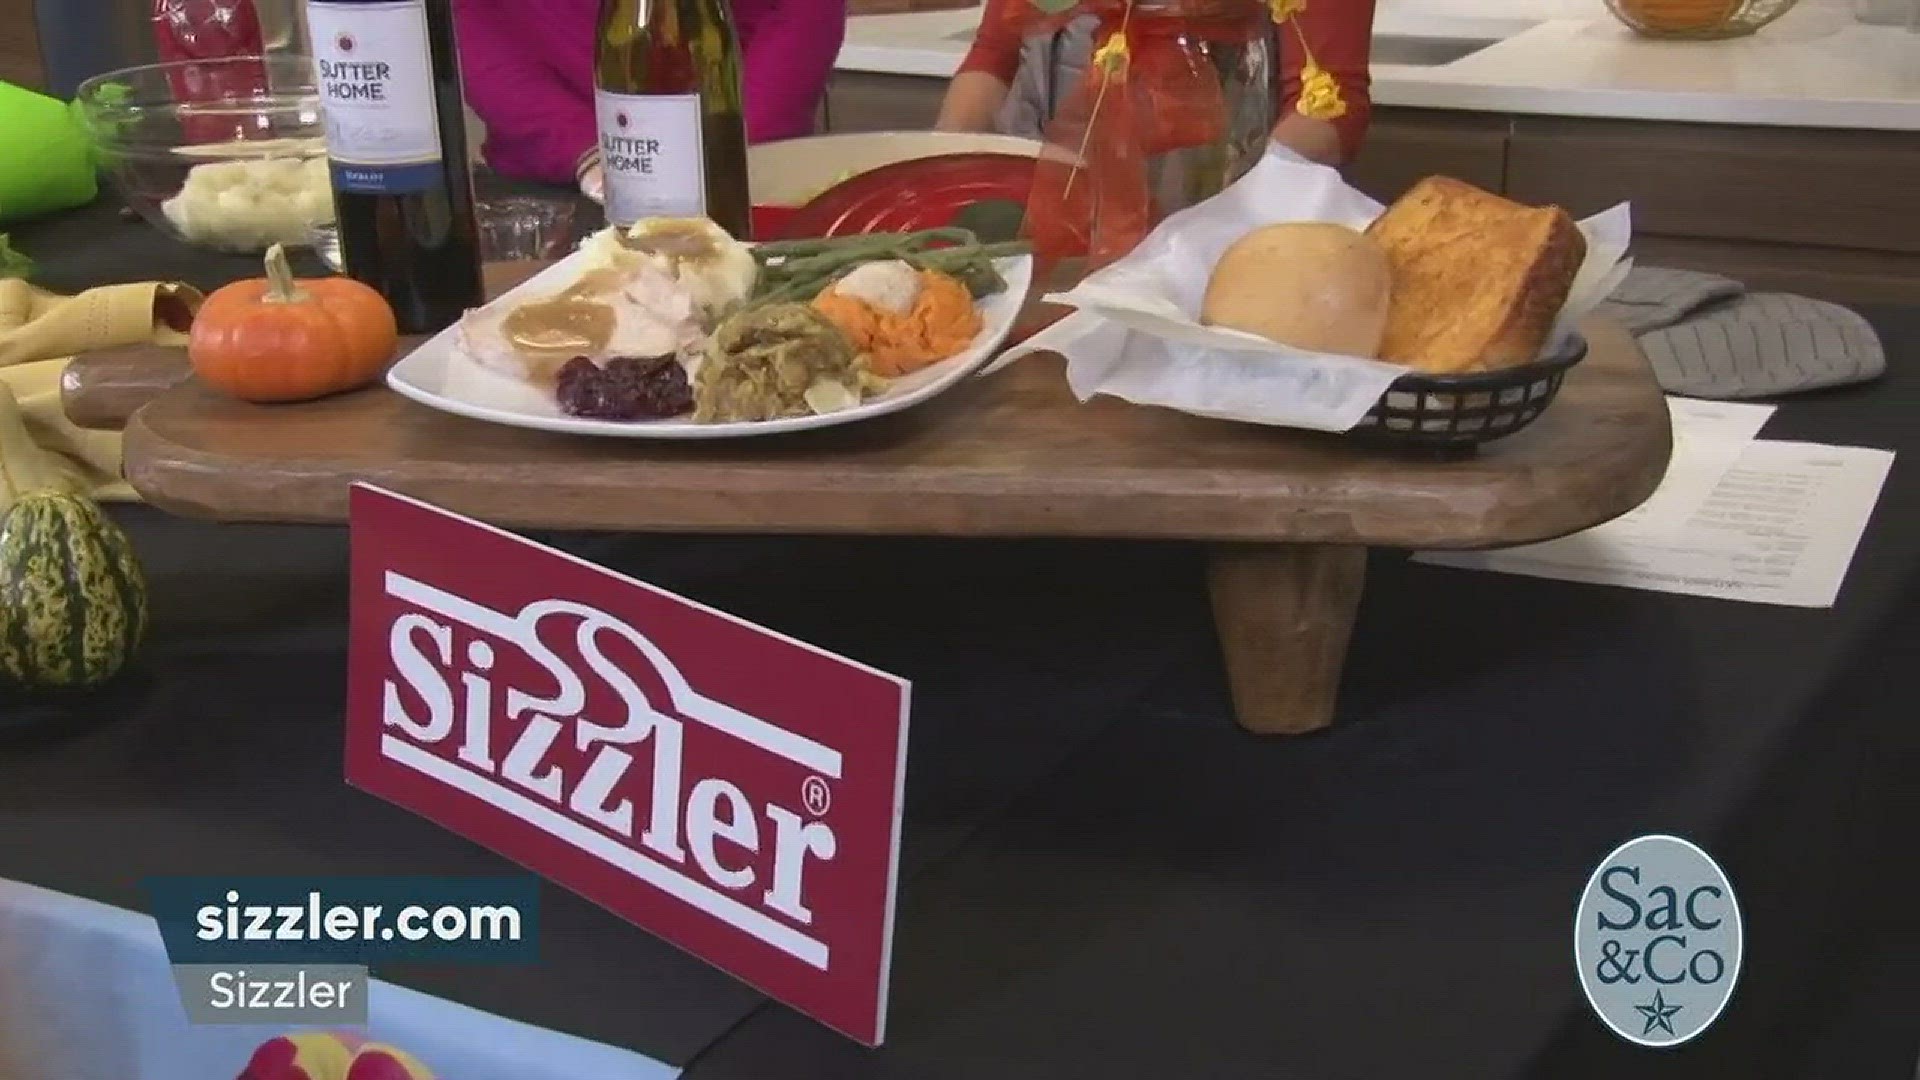 Lose the apron and take the family to Sizzler for Thanksgiving!